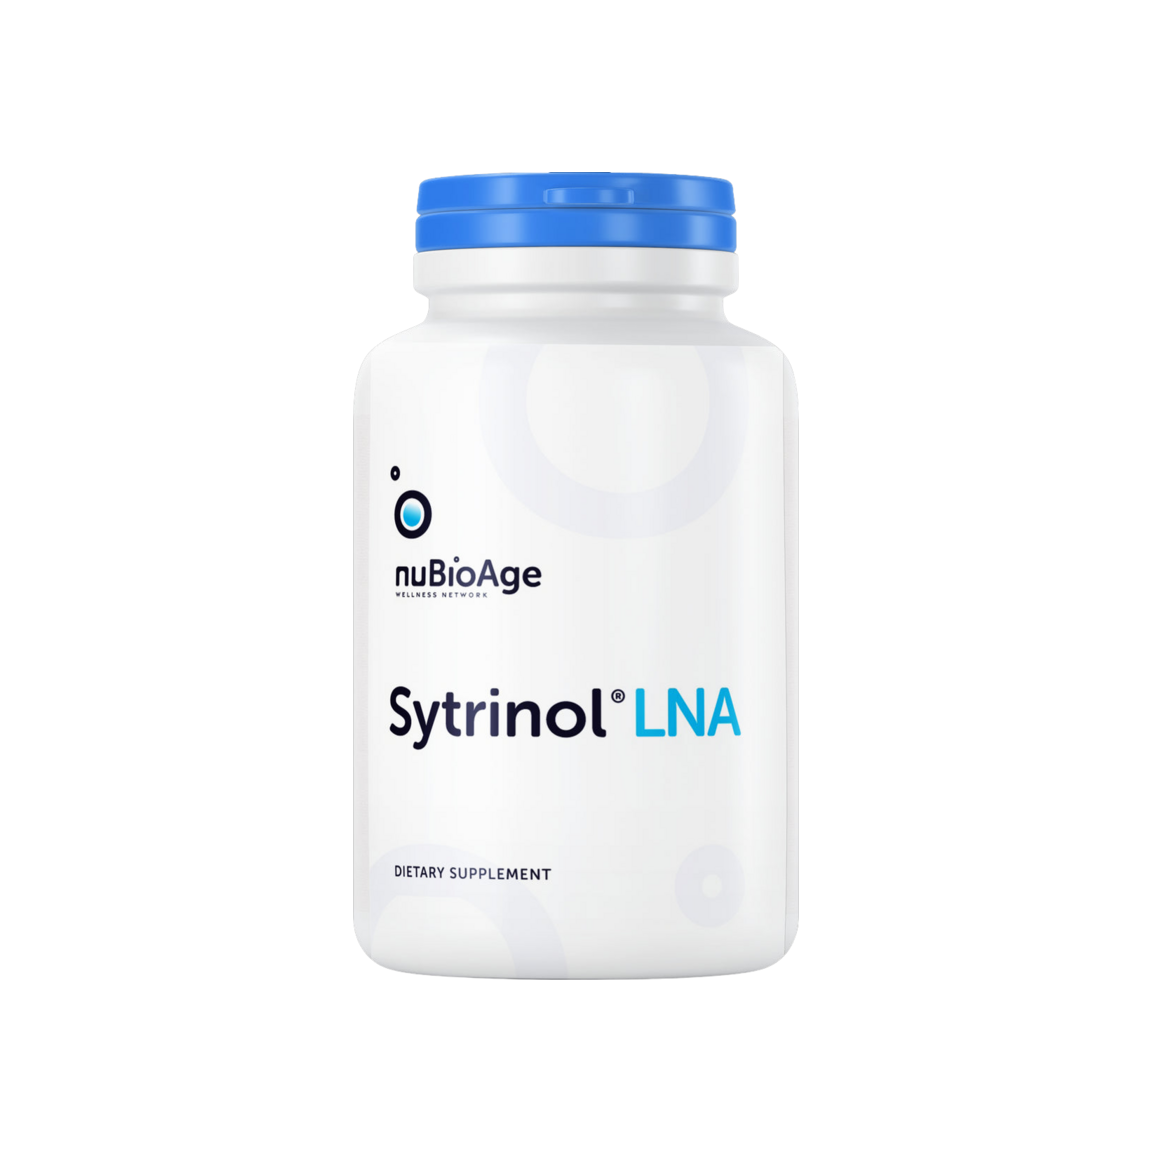 Sytrinol LNA supplement promoting longevity and OHP health displayed on black background.